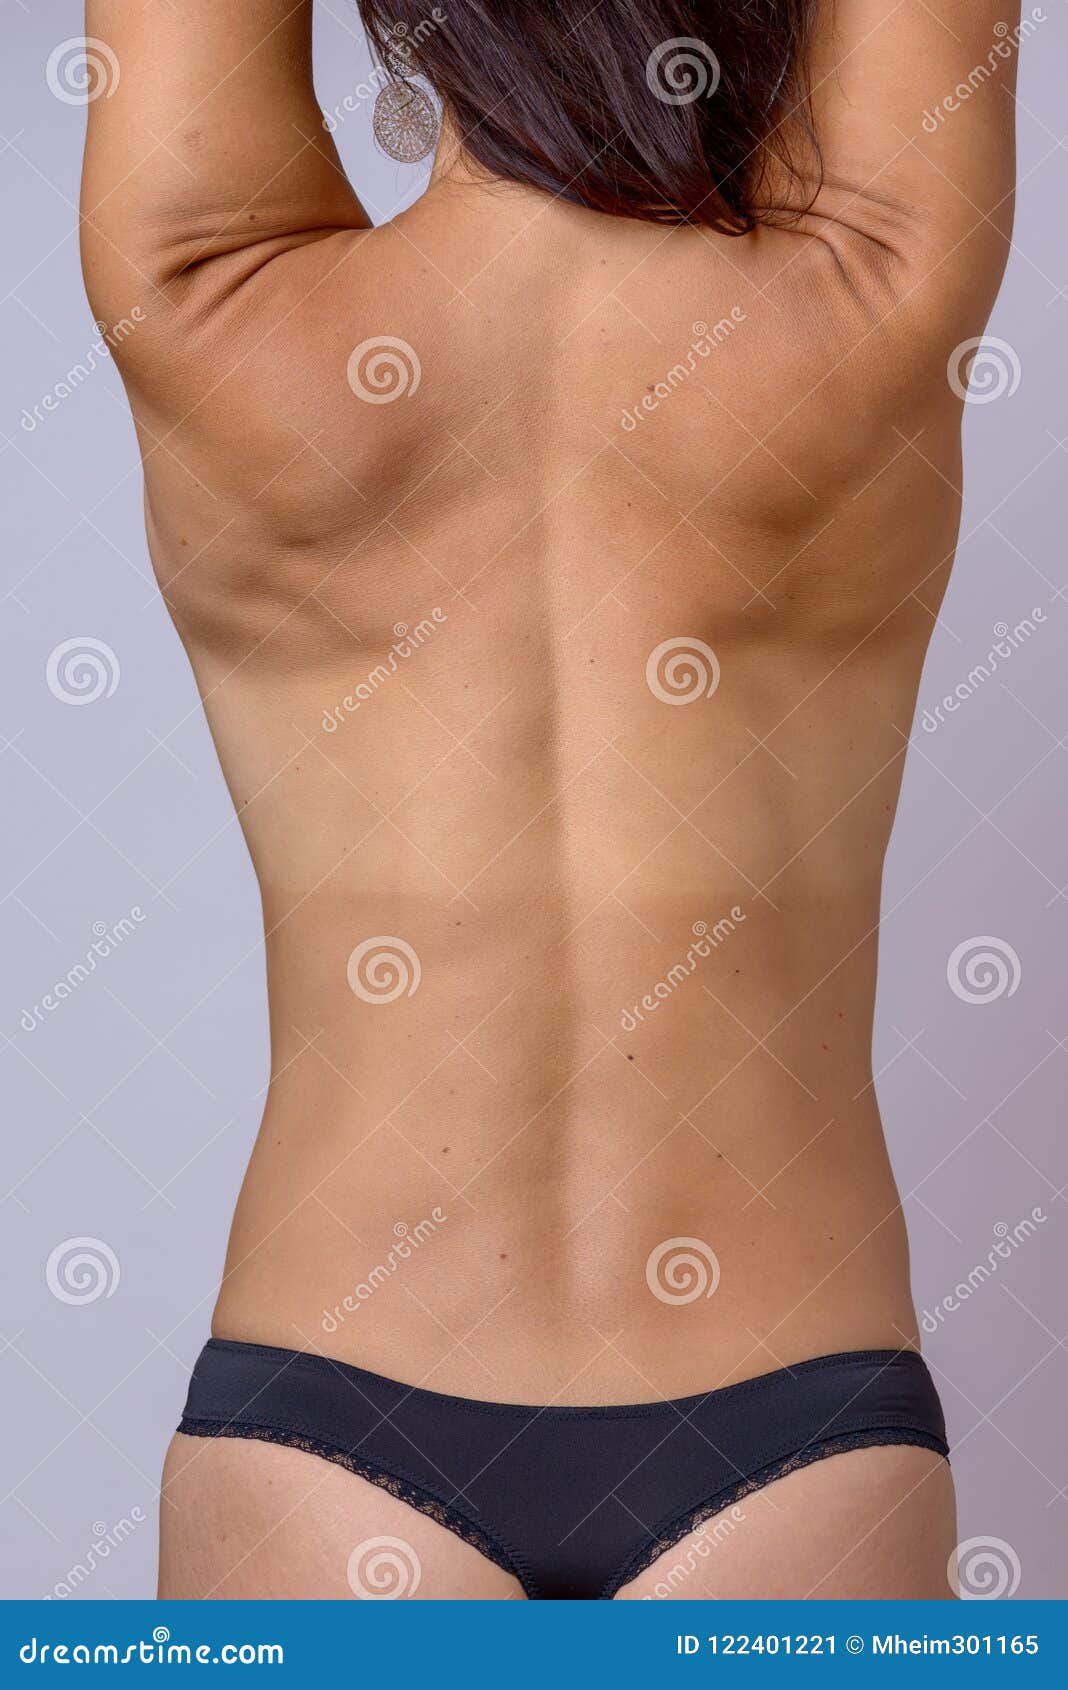 https://thumbs.dreamstime.com/z/bare-back-slender-athletic-toned-woman-bare-back-slender-athletic-toned-woman-holding-her-arms-above-her-head-wearing-122401221.jpg